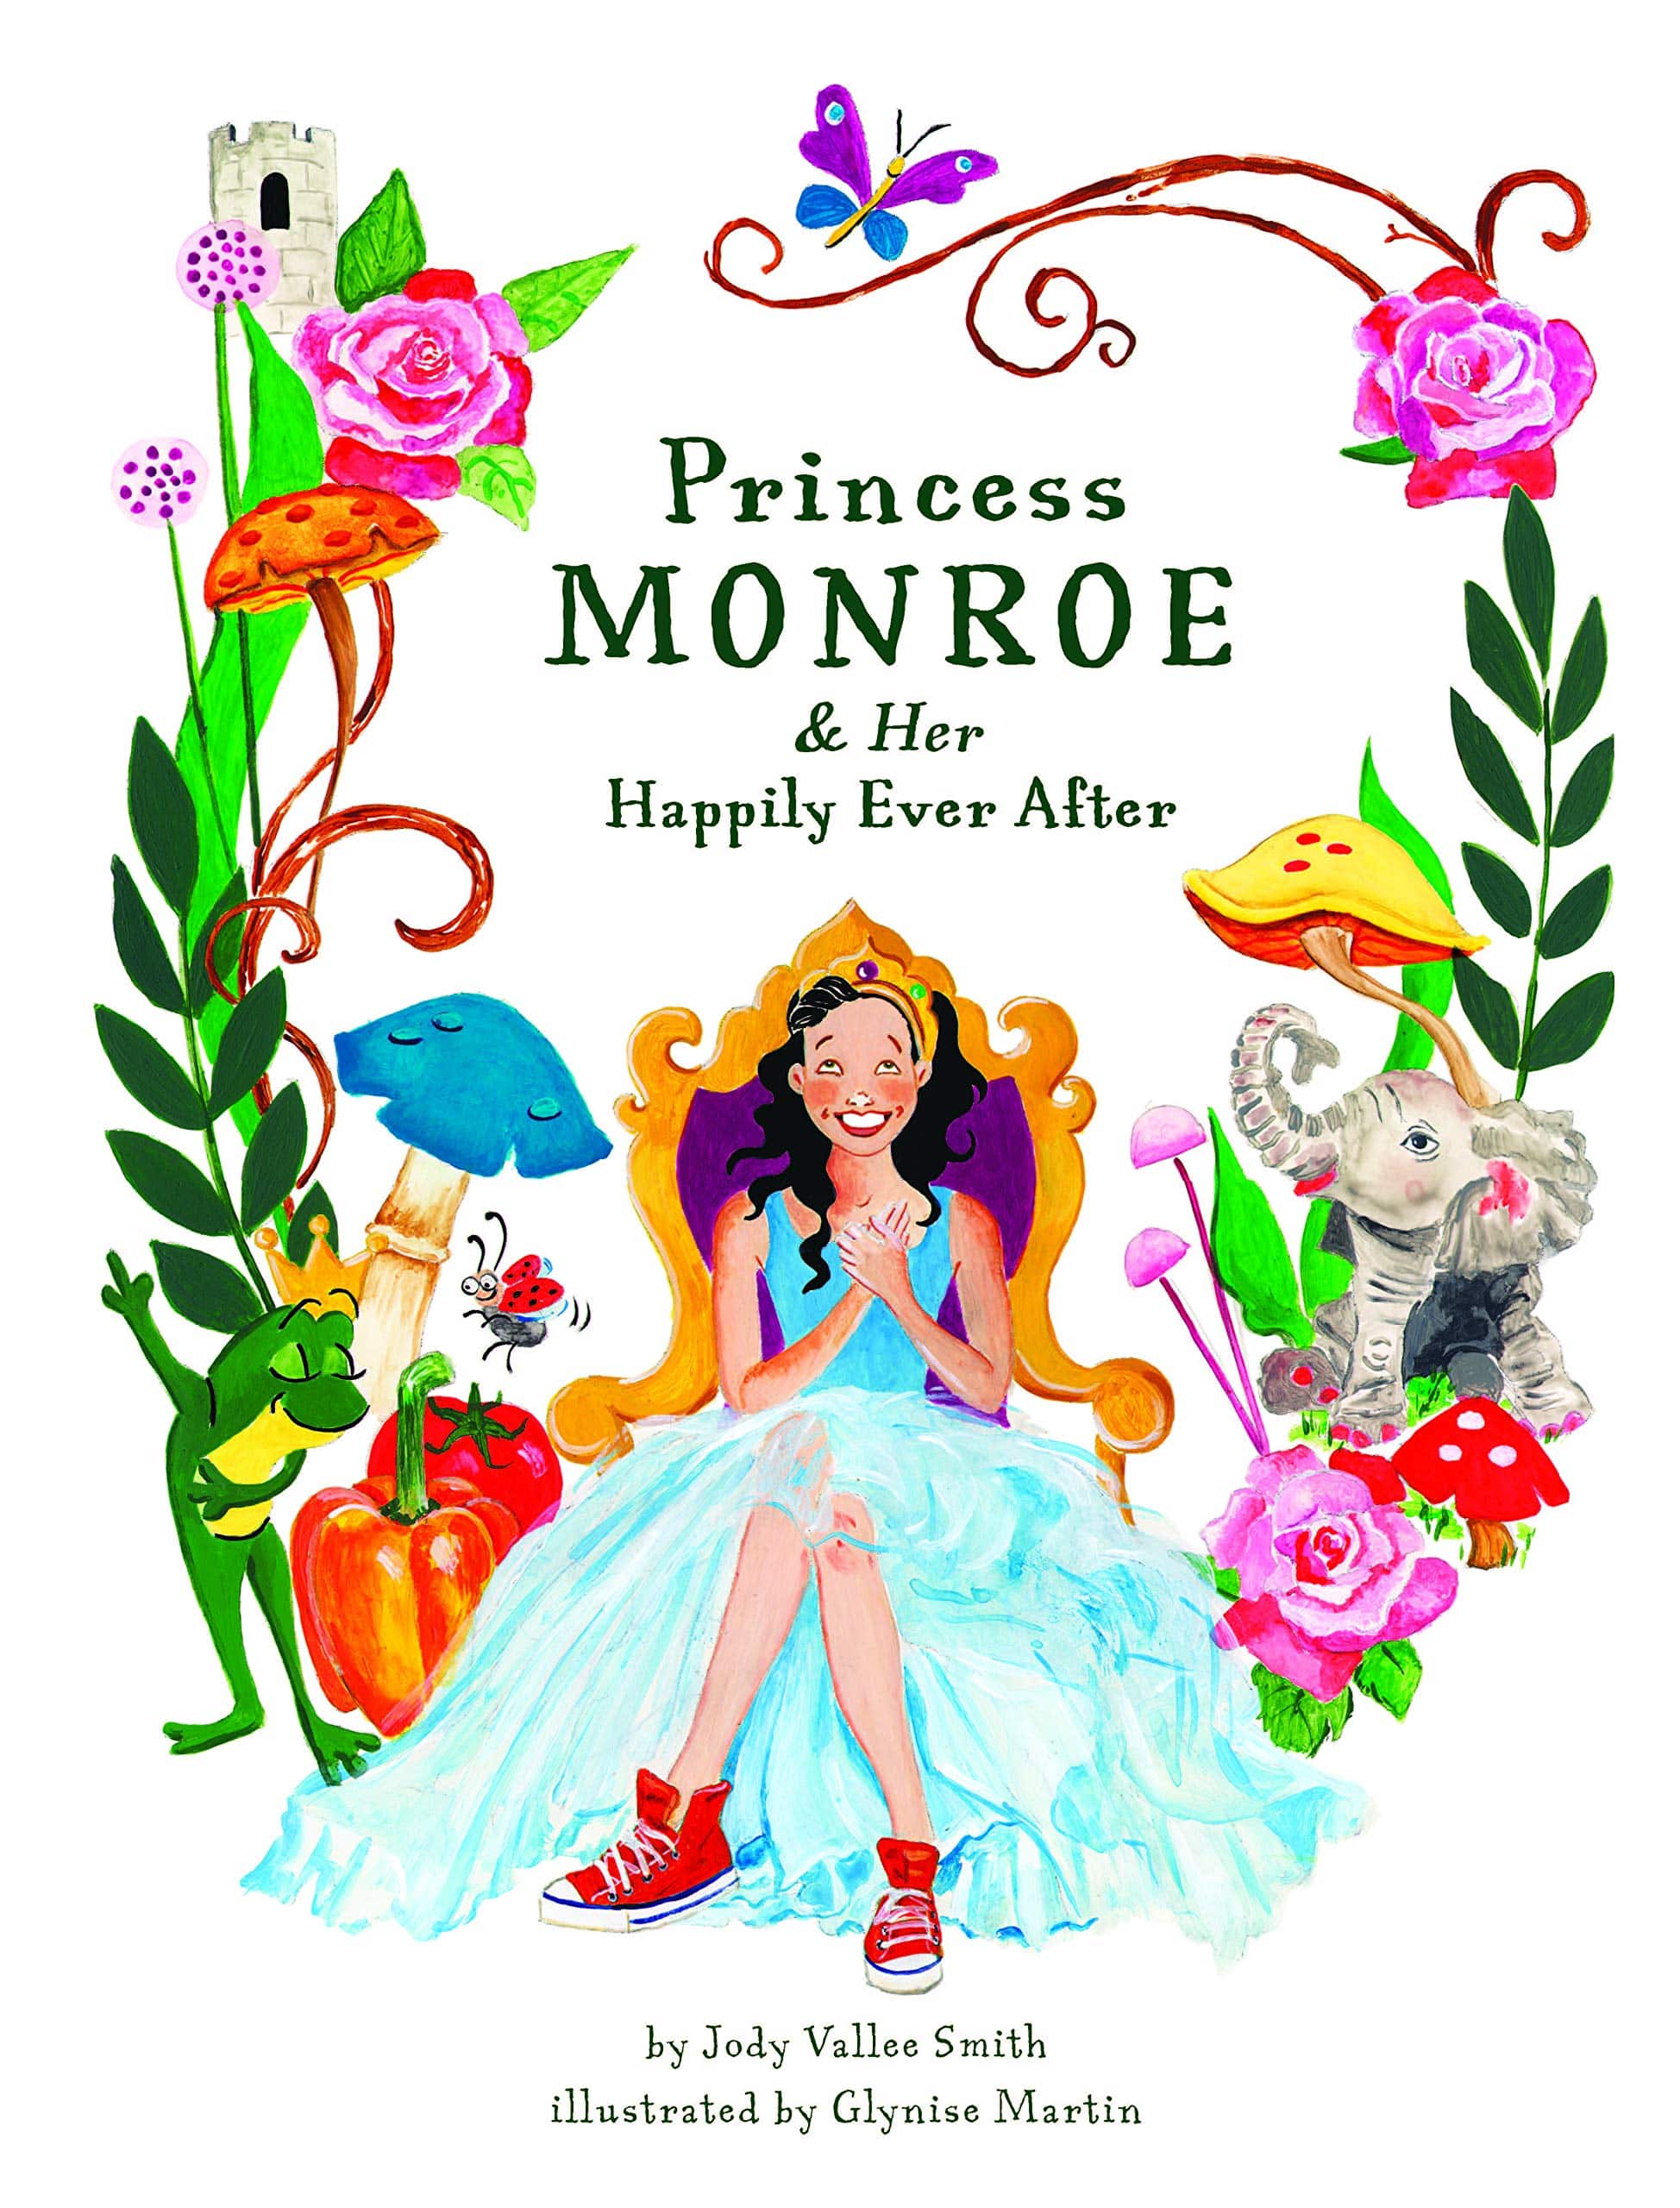 PRINCESS MONROE & HER HAPPILY EVER AFTER BY JODY VALLEE SMITH